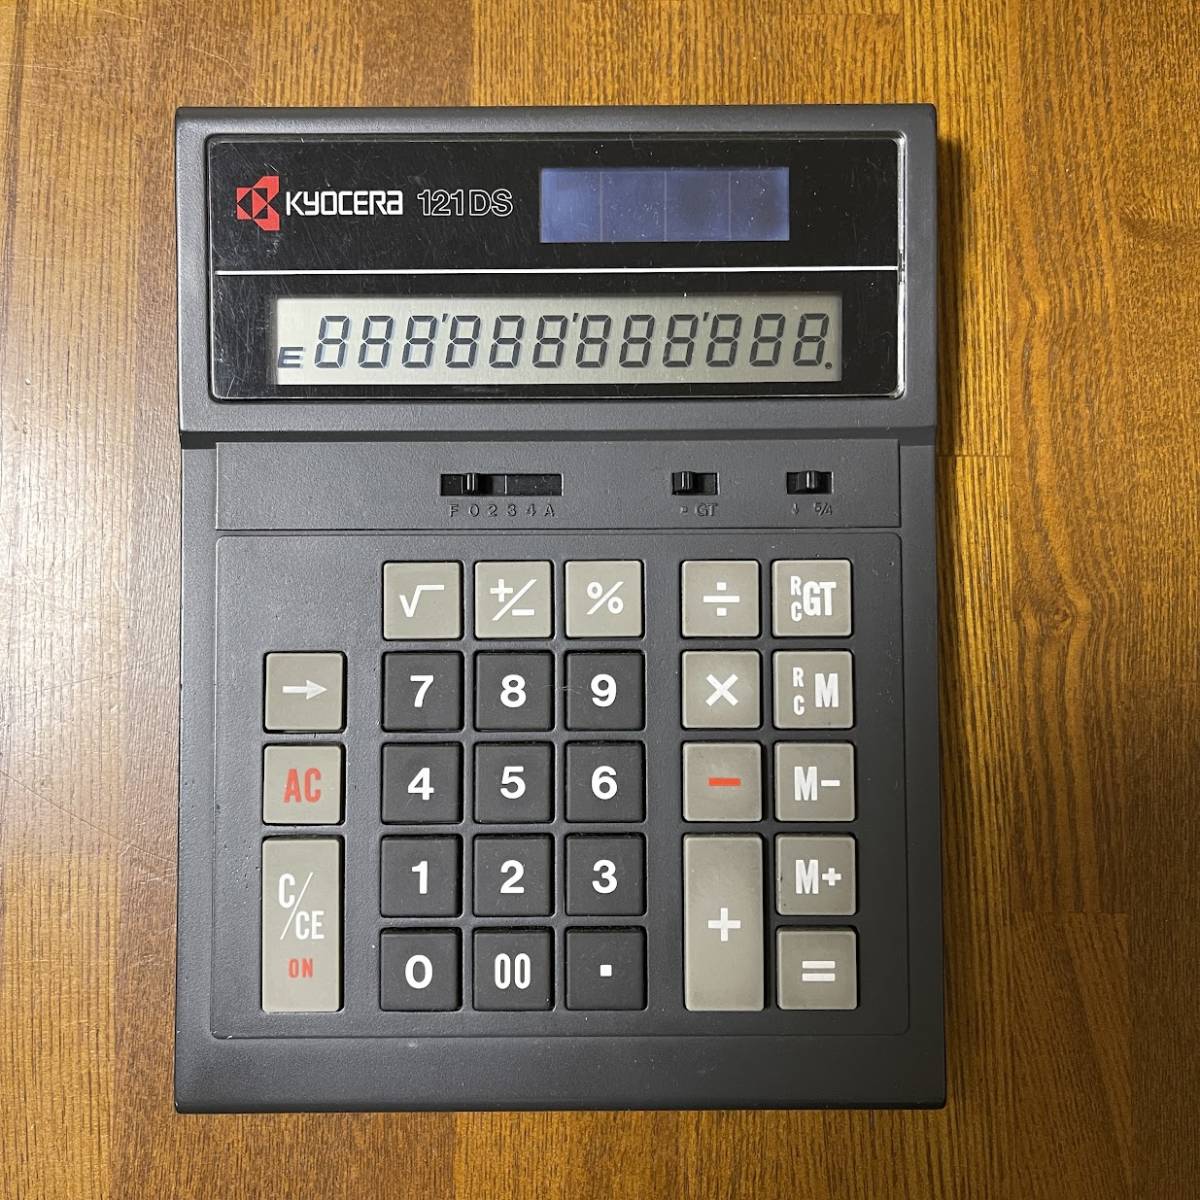  prompt decision! Kyocera KYOCERA solar calculator 121DS 1985 year gdo design . winning at that time regular price 12800 jpy battery un- necessary Showa Retro antique once Junk exhibition 